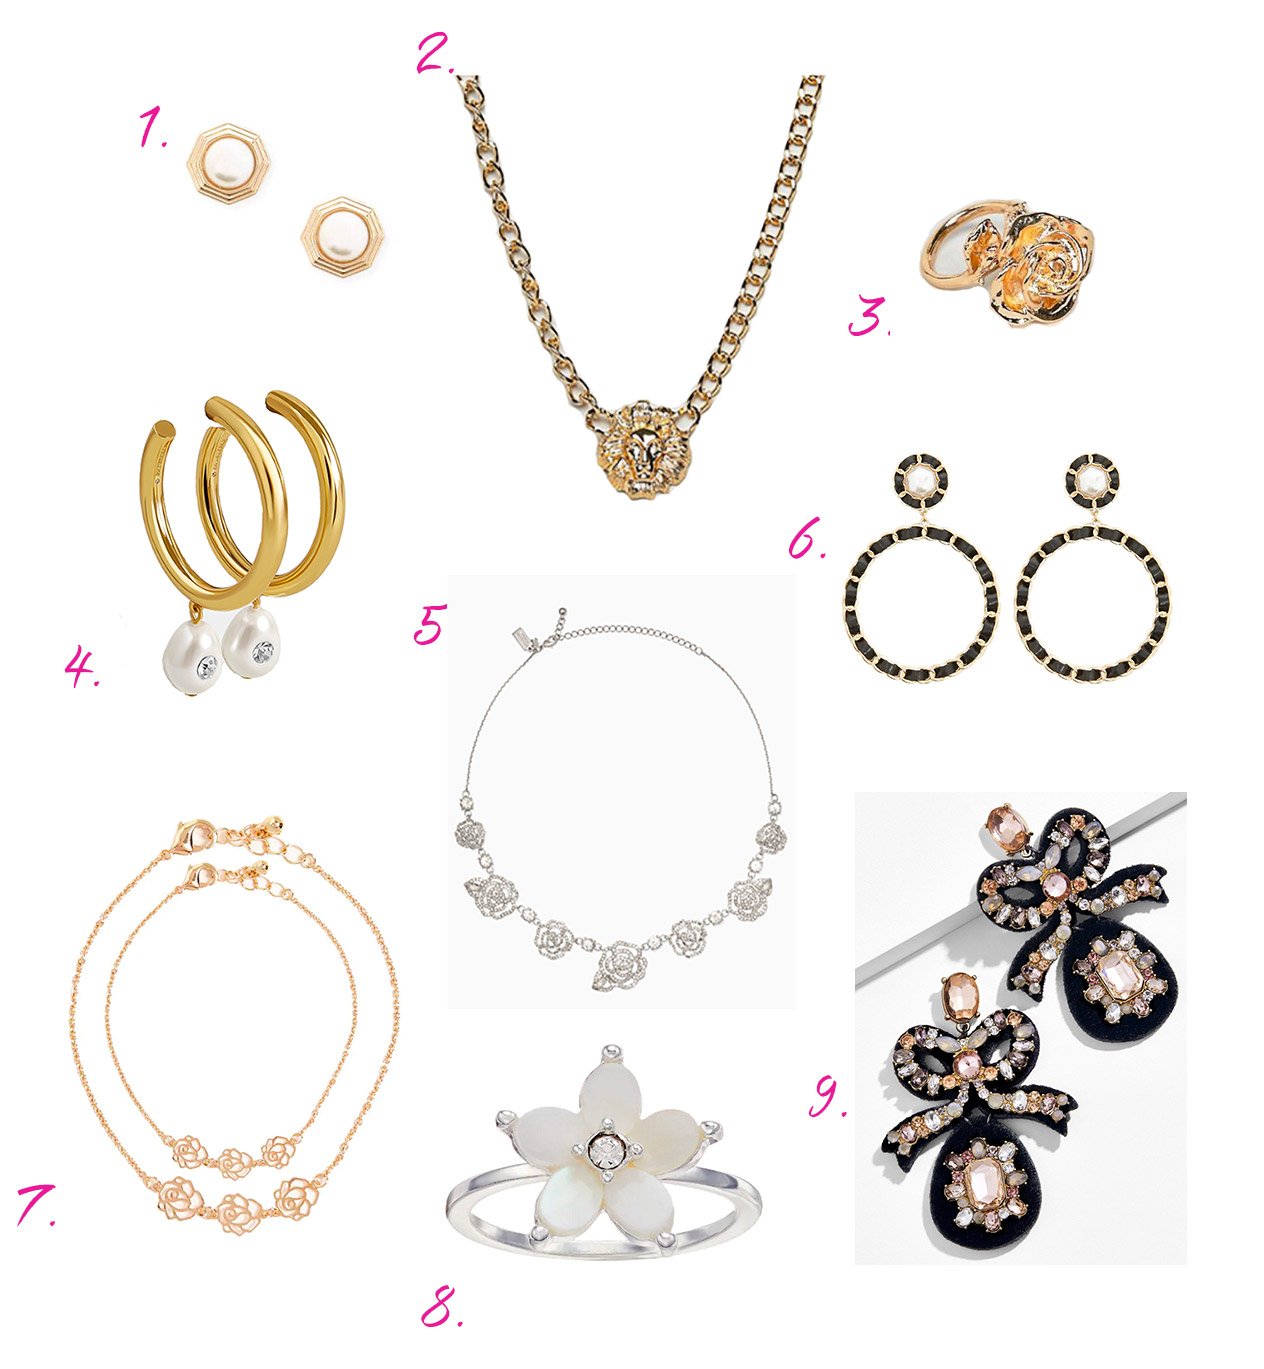 Chanel Inspired Jewelry for Less